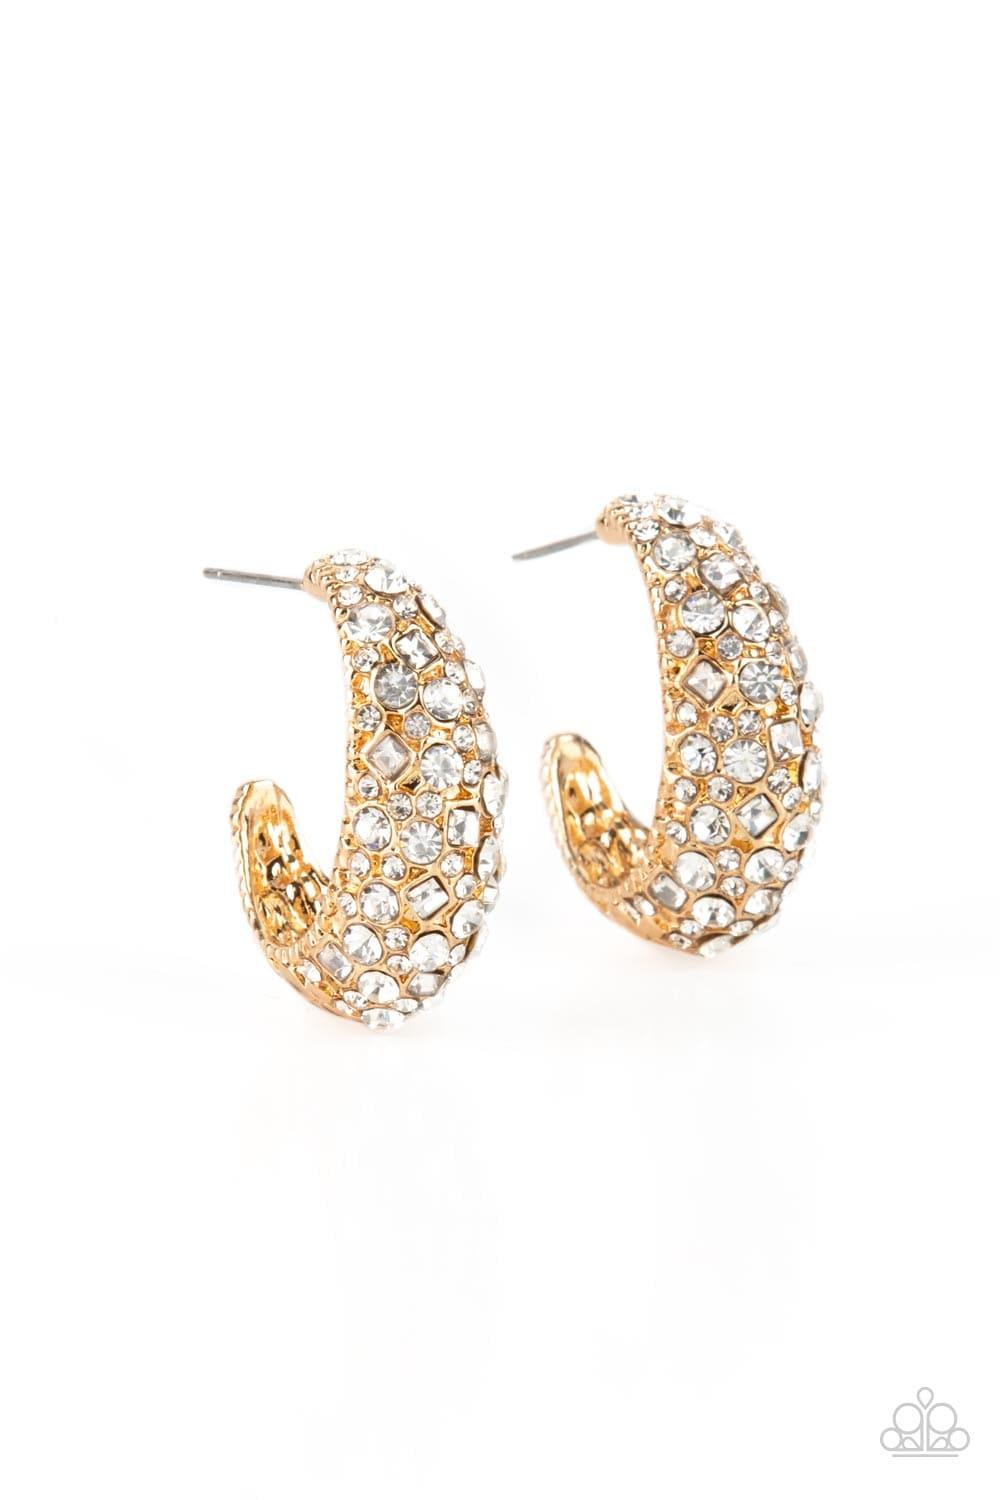 Paparazzi Accessories - Glamorously Glimmering - Gold Earrings - Bling by JessieK